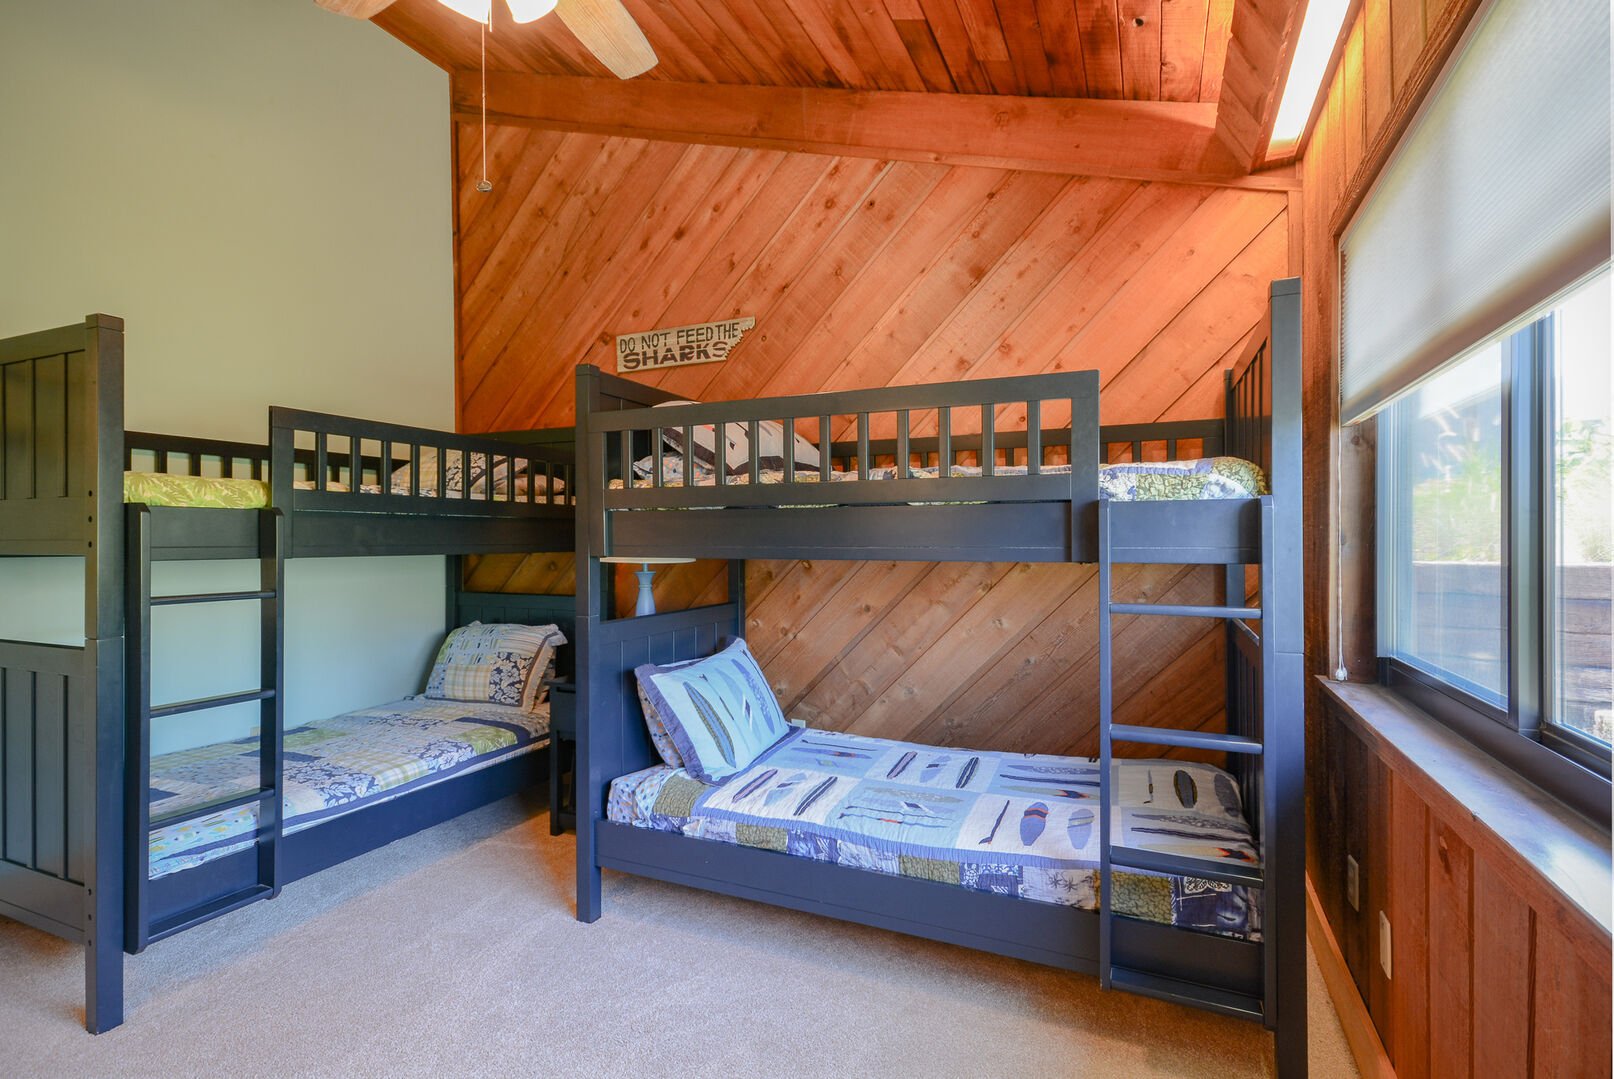 3rd bedroom with 2 sets of bunk beds, 4 beds total.